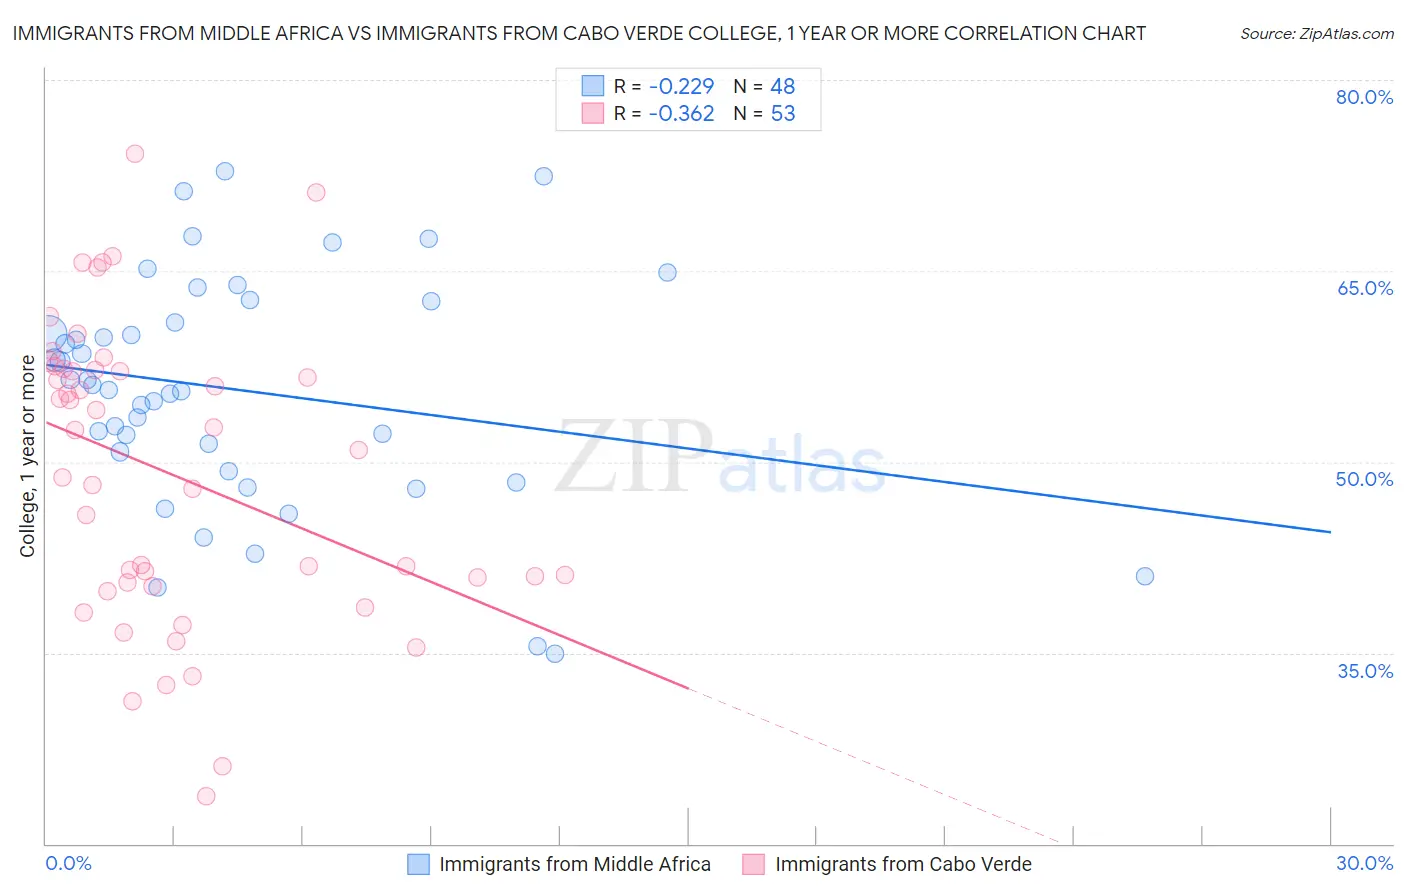 Immigrants from Middle Africa vs Immigrants from Cabo Verde College, 1 year or more